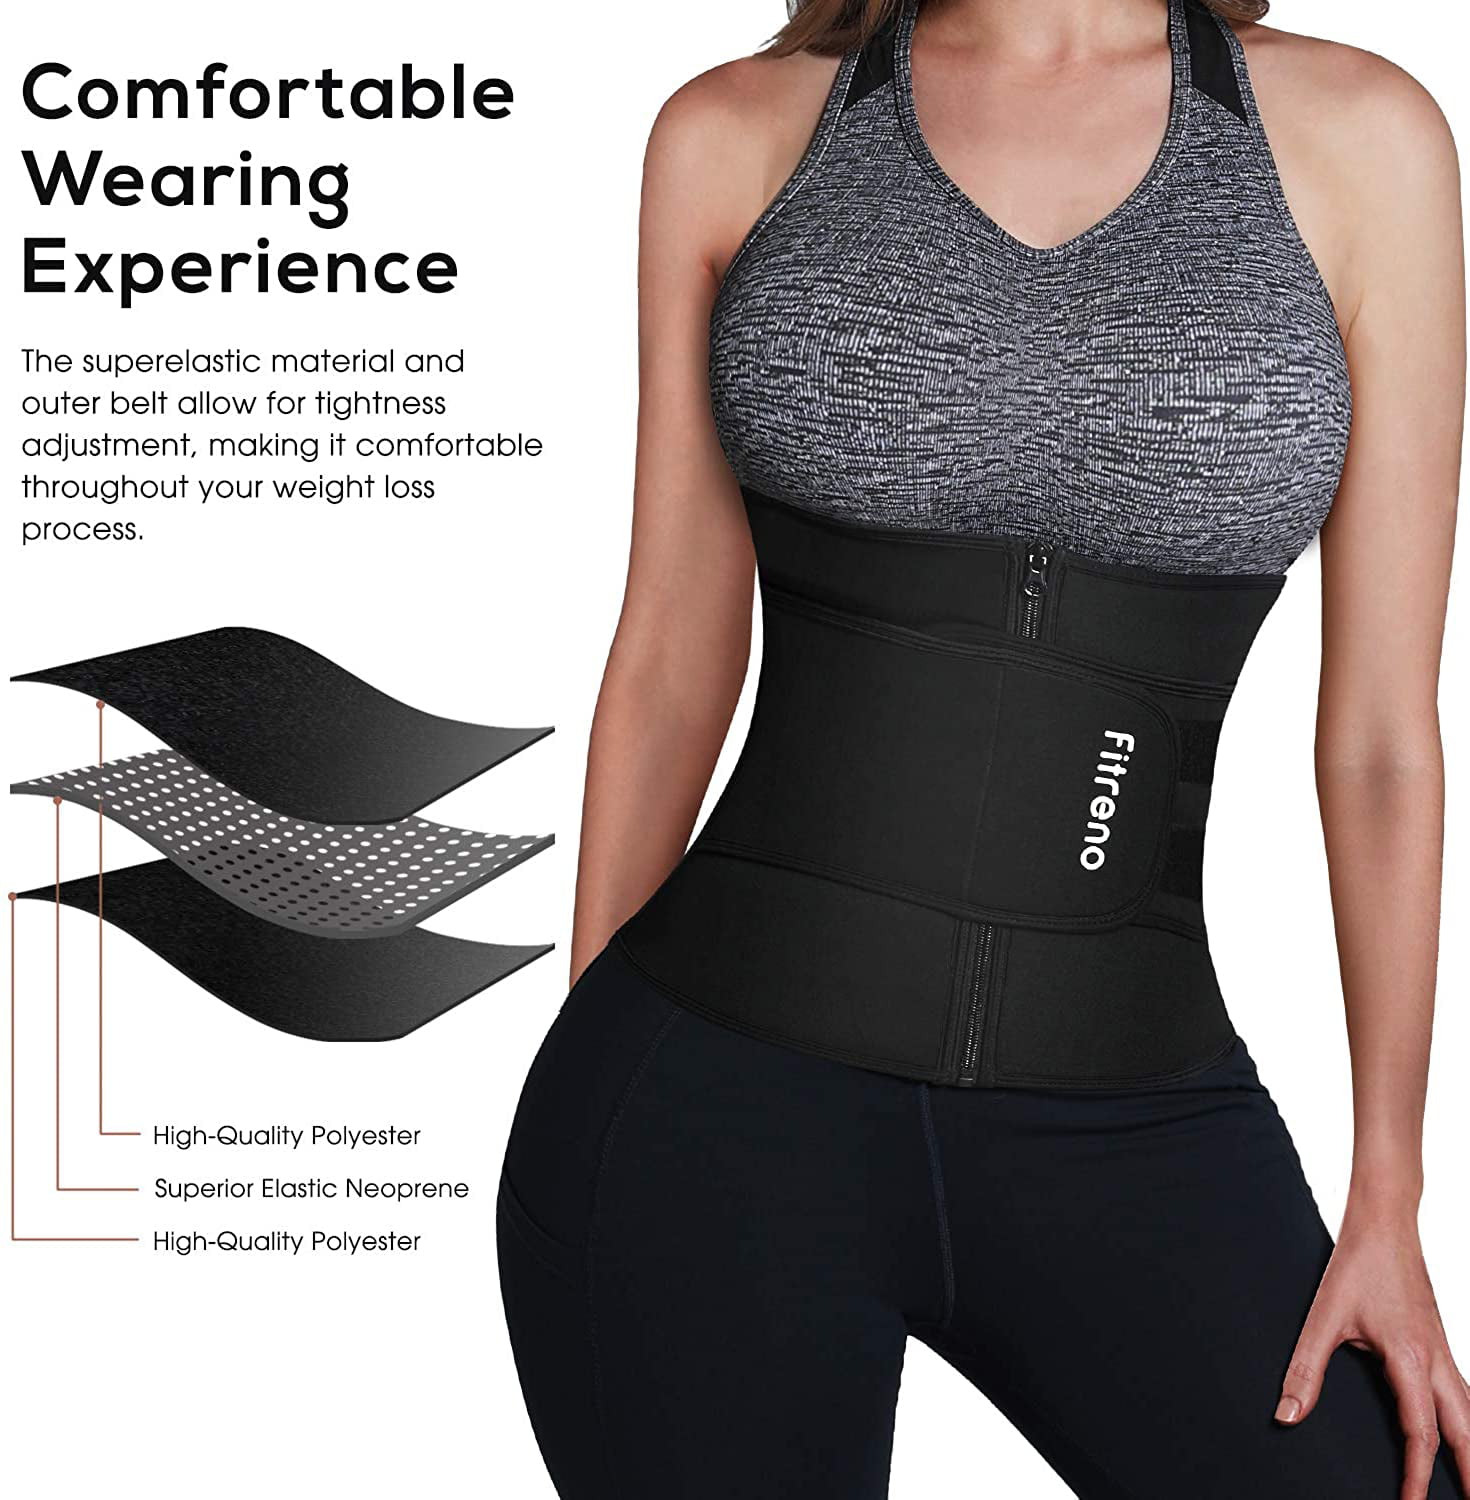 Fitreno Corset Waist Trainer for Women,Sweat Band Waist Trimmer Belt for Body Shaping 